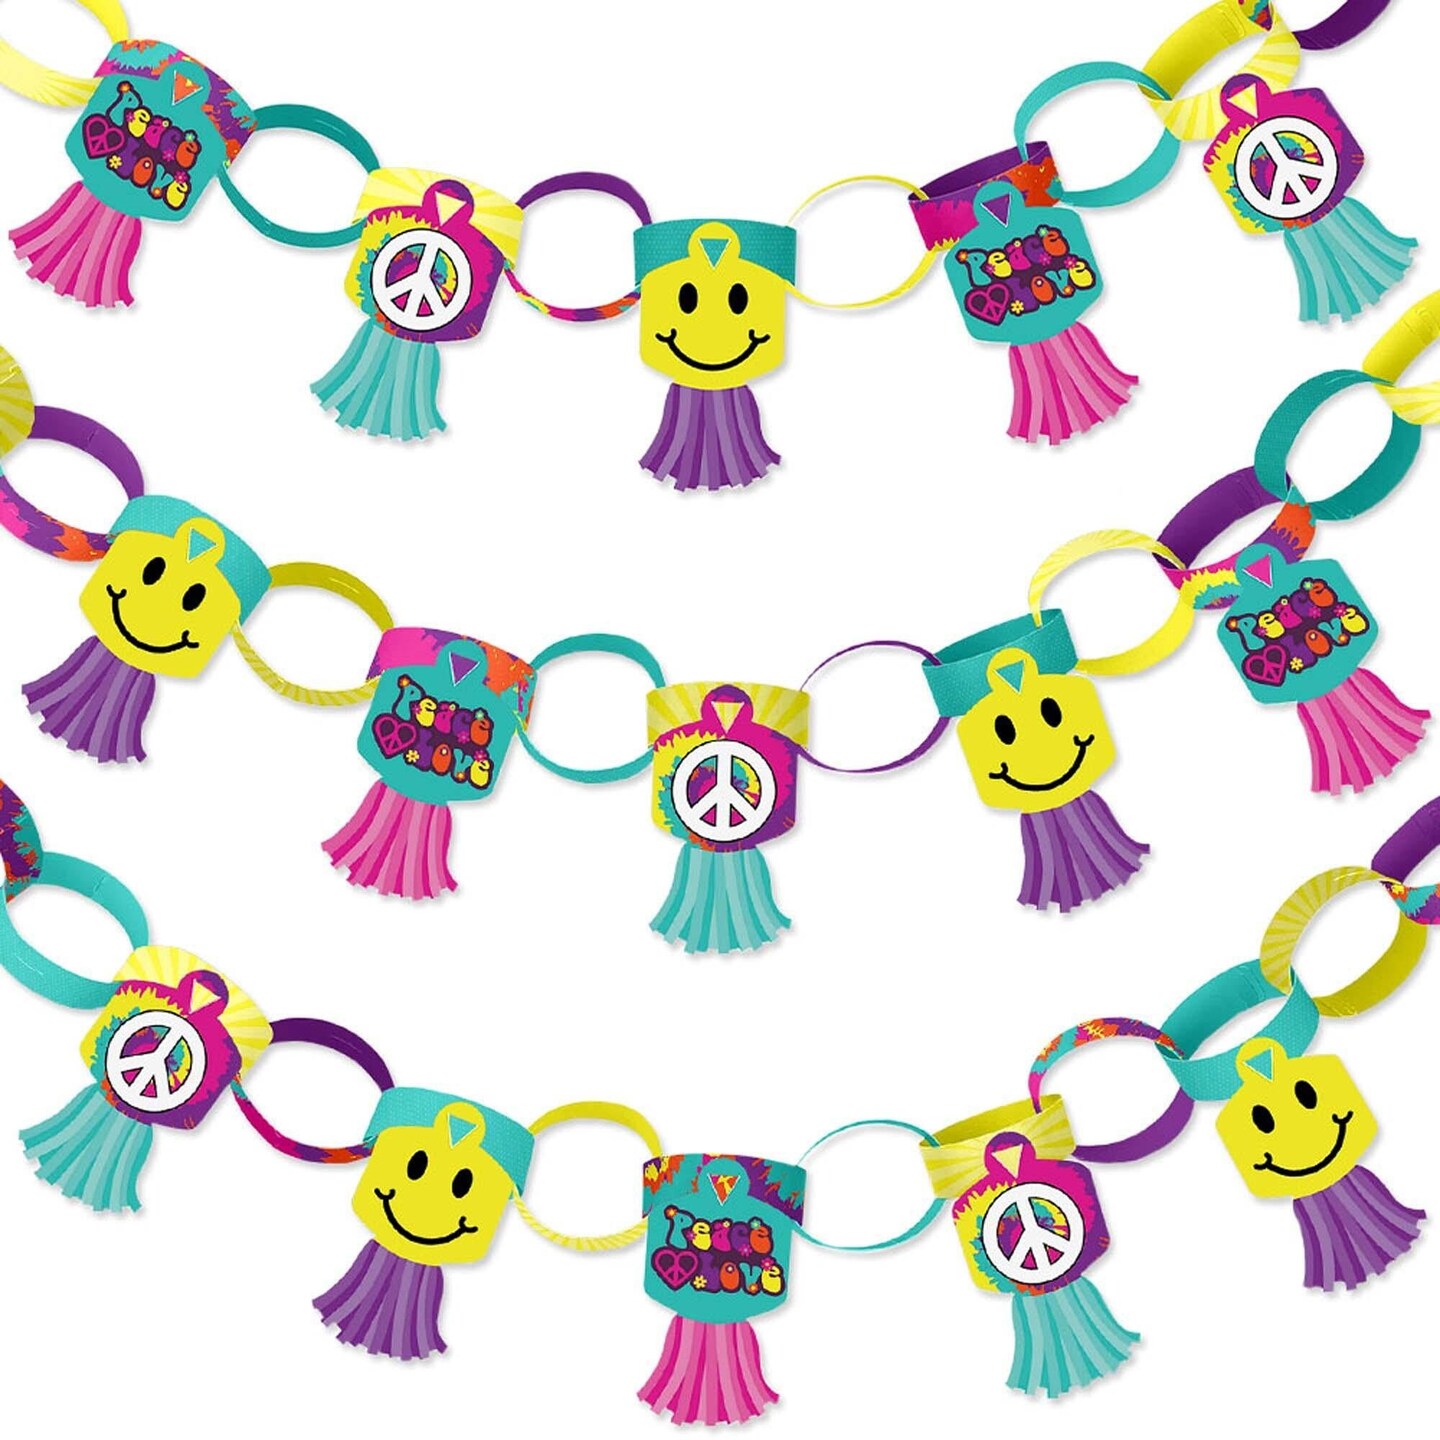 Big Dot of Happiness 60&#x27;s Hippie - 90 Chain Links and 30 Paper Tassels Decoration Kit - 1960s Groovy Party Paper Chains Garland - 21 feet